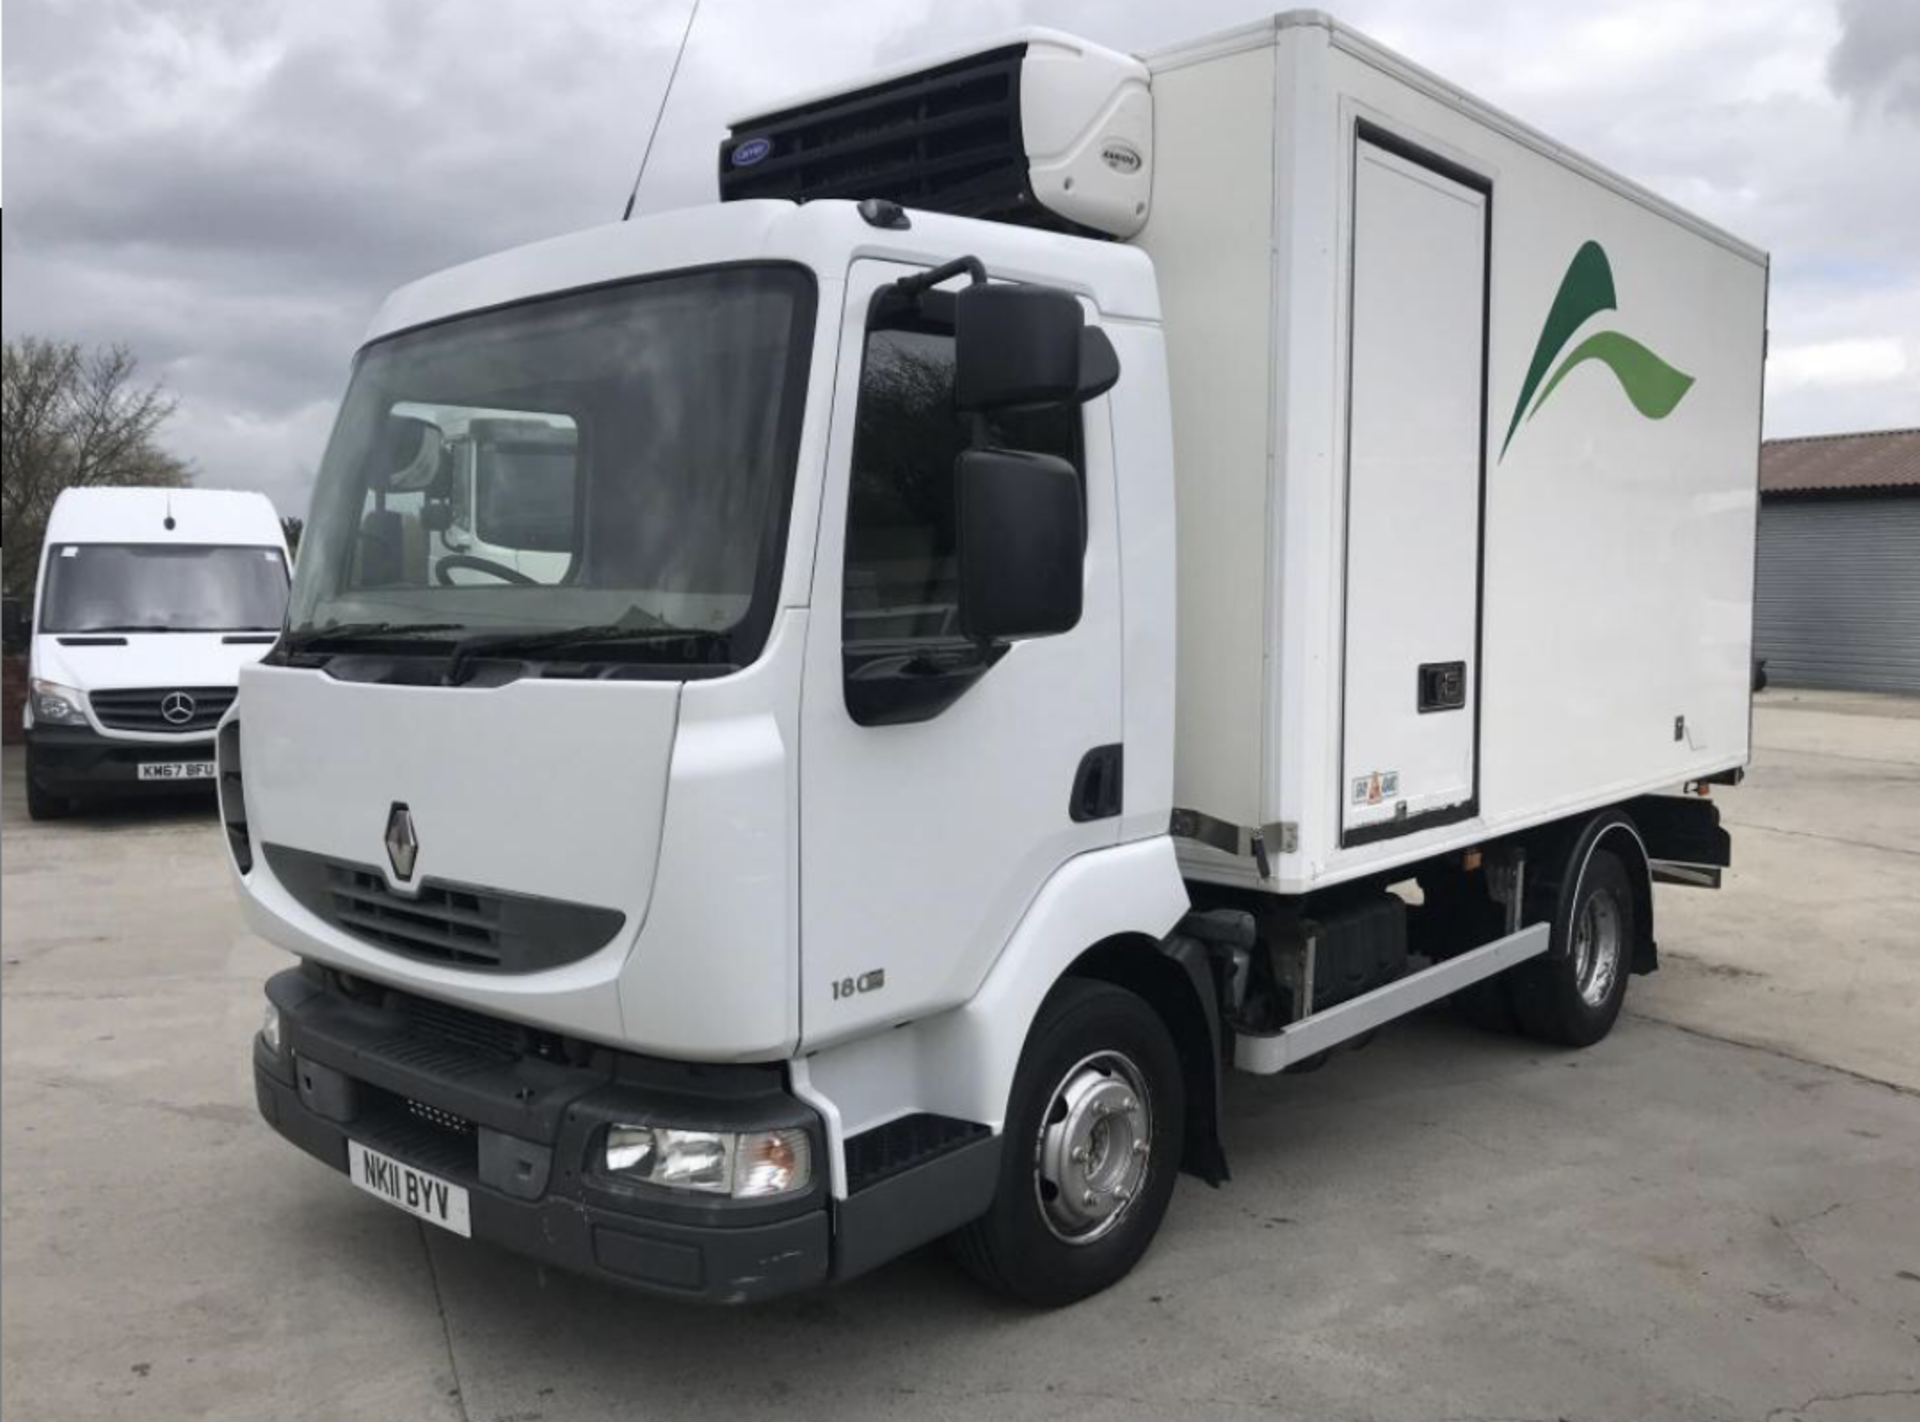 2011 RENAULT MIDLUM 180DXI REFRIGERATED TRUCK WITH SIDE DOOR, SHOWING 694136.2 KM *PLUS VAT* - Image 2 of 15